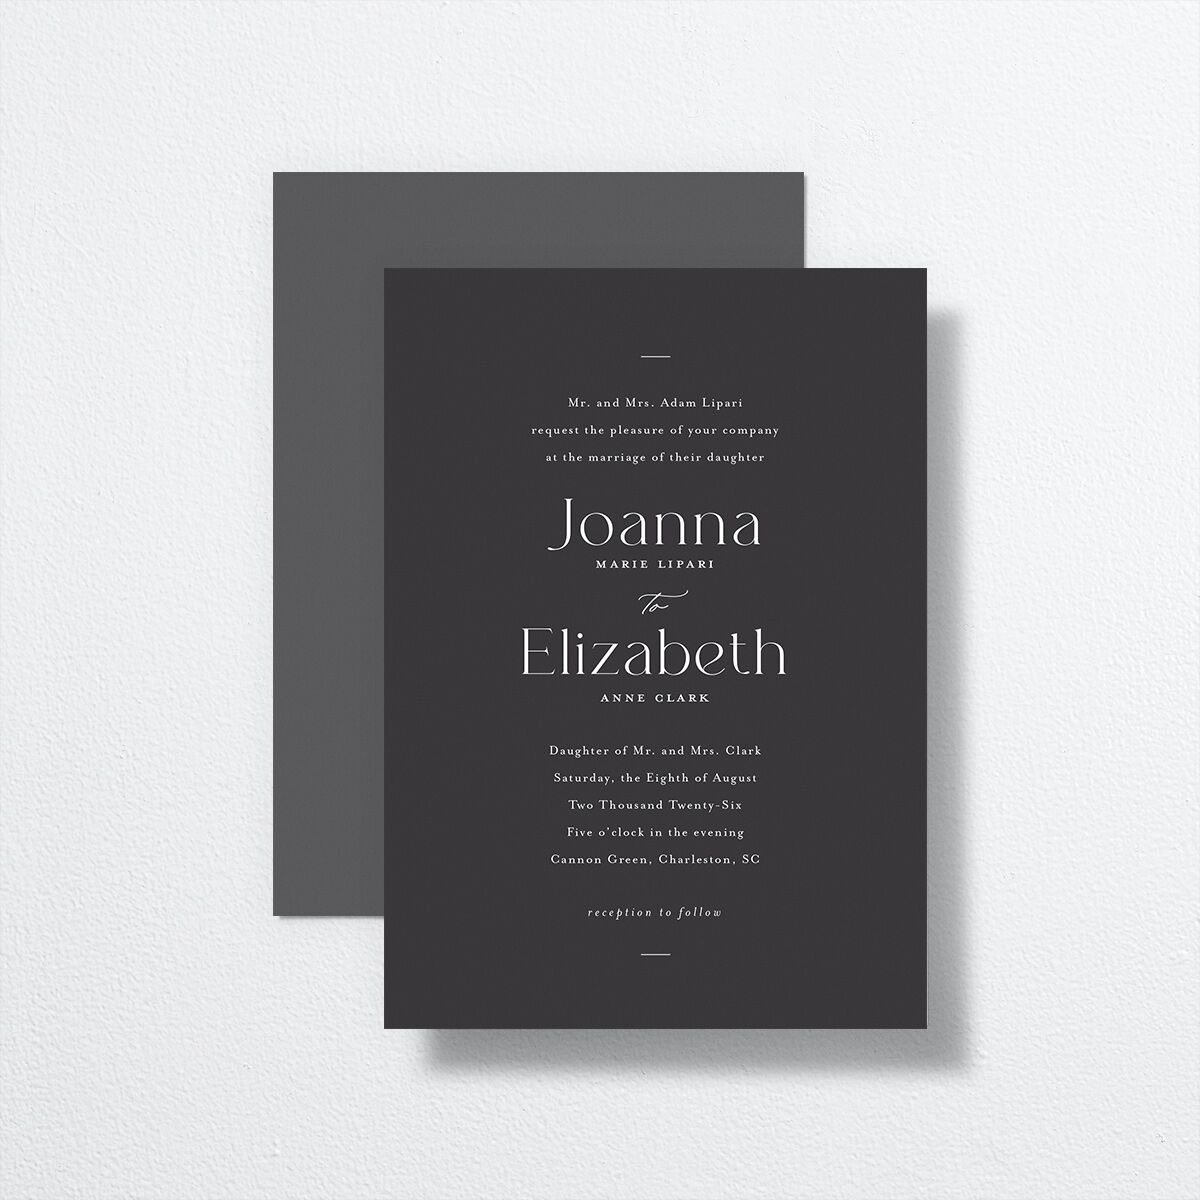 Refined Wedding Invitations front-and-back in black